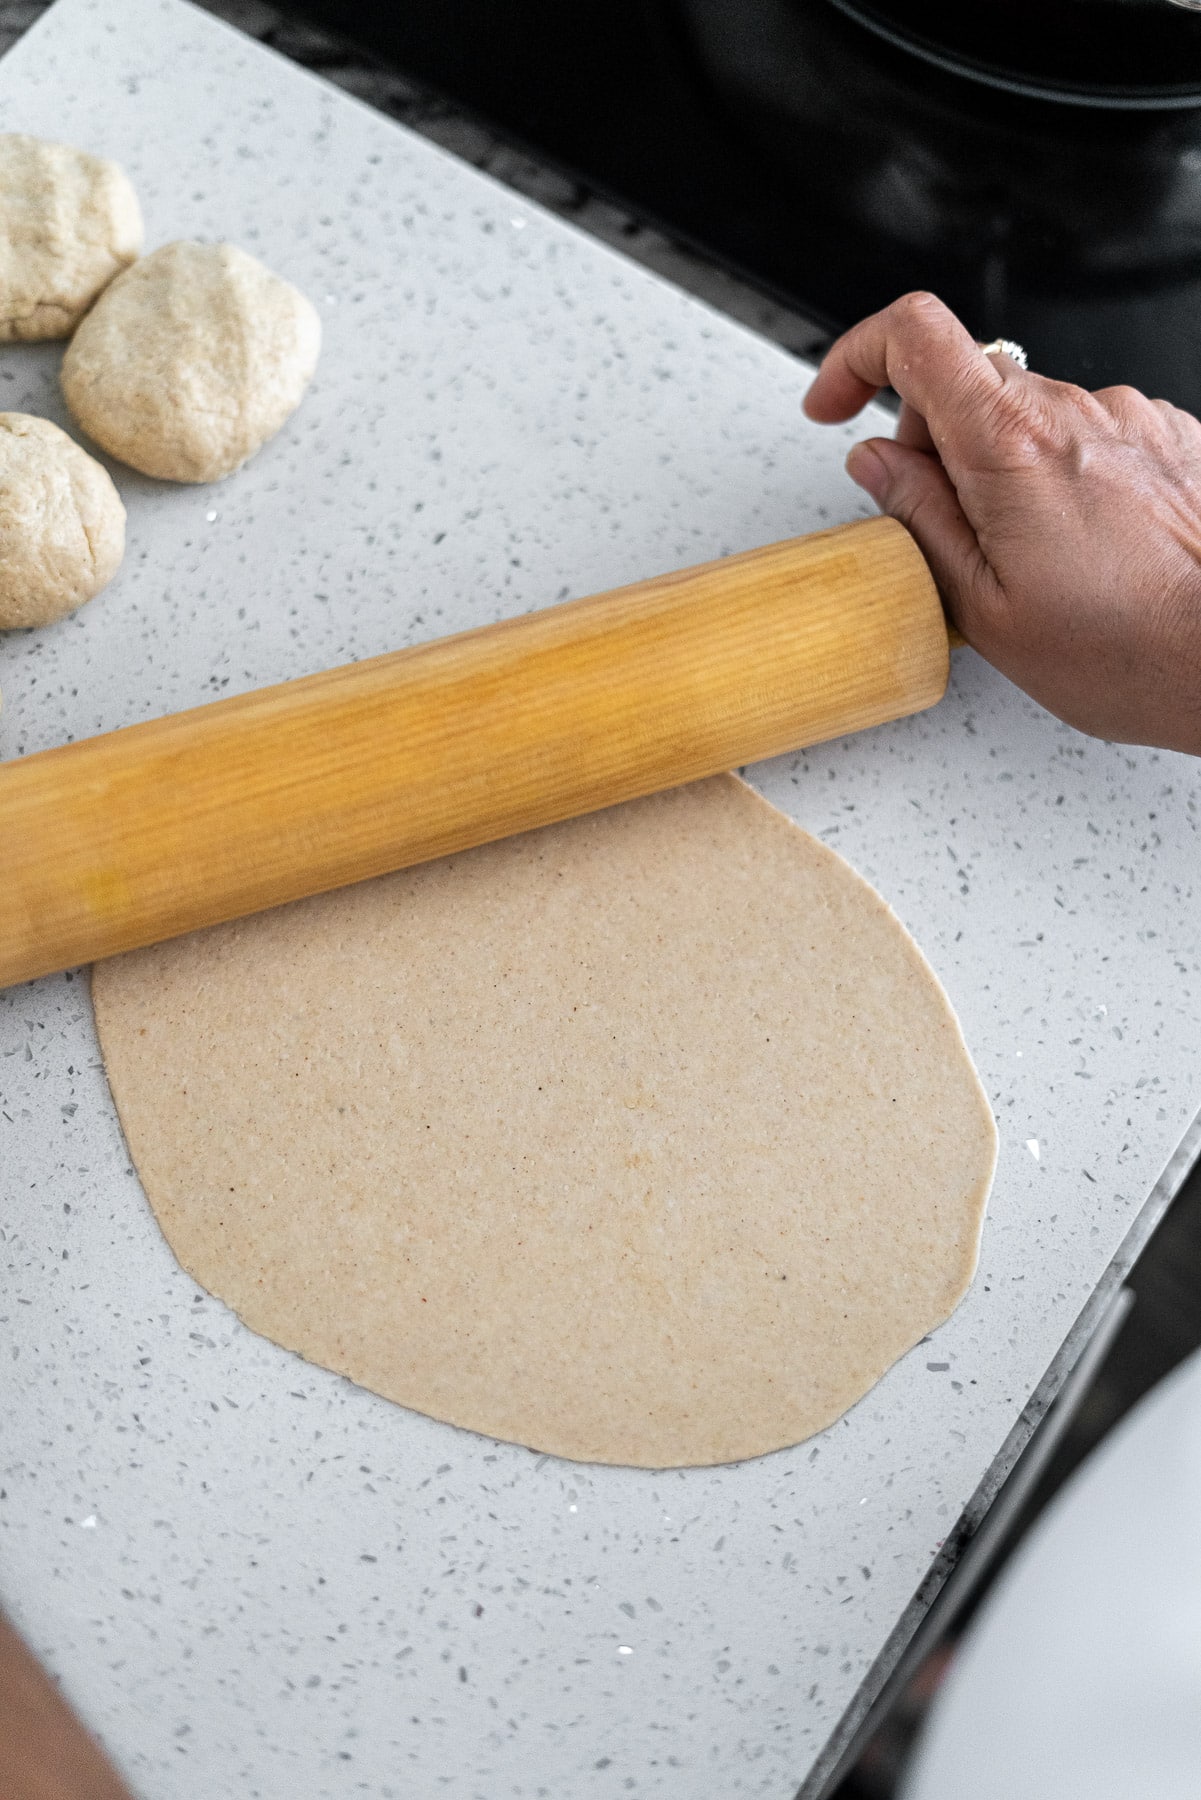 Rolling out bhature dough with a rolling pin.